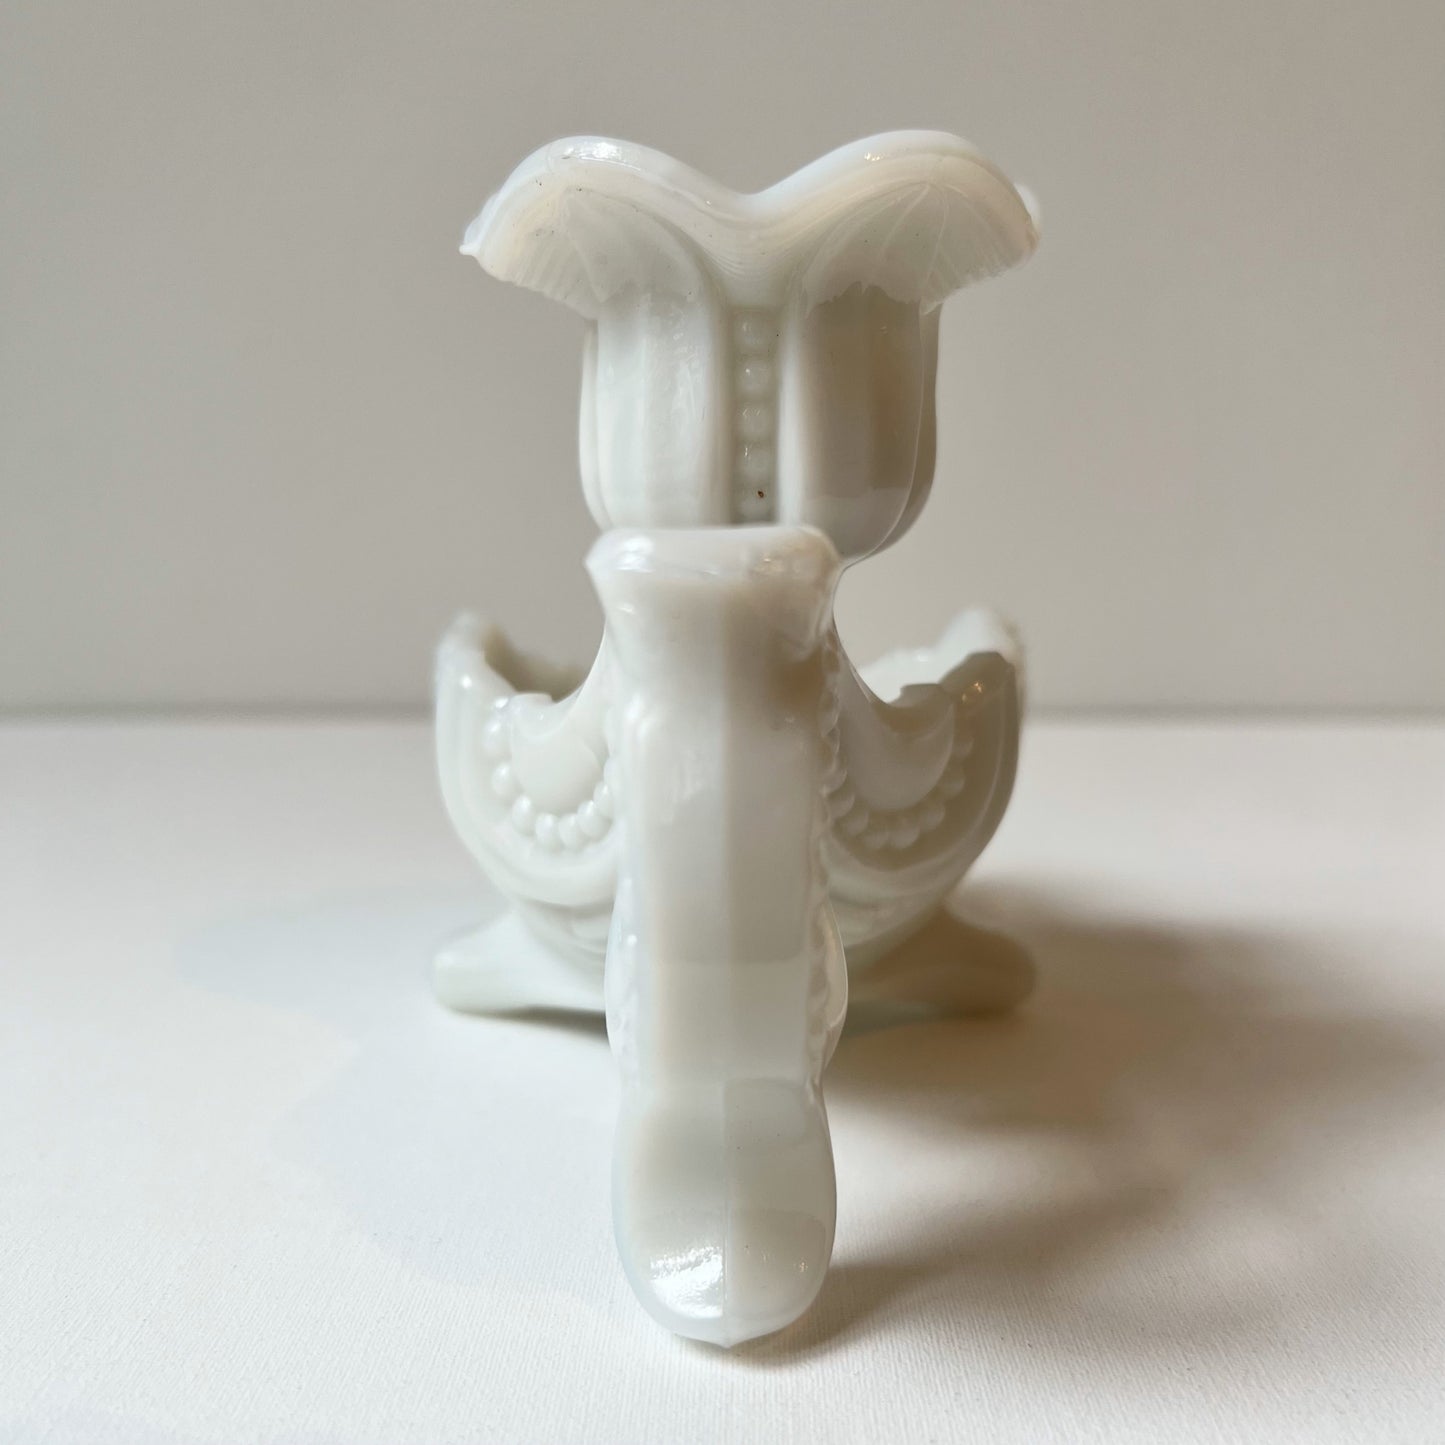 【Antique】France - Portieux 1894s White Milk Glass Flower Candle Holder